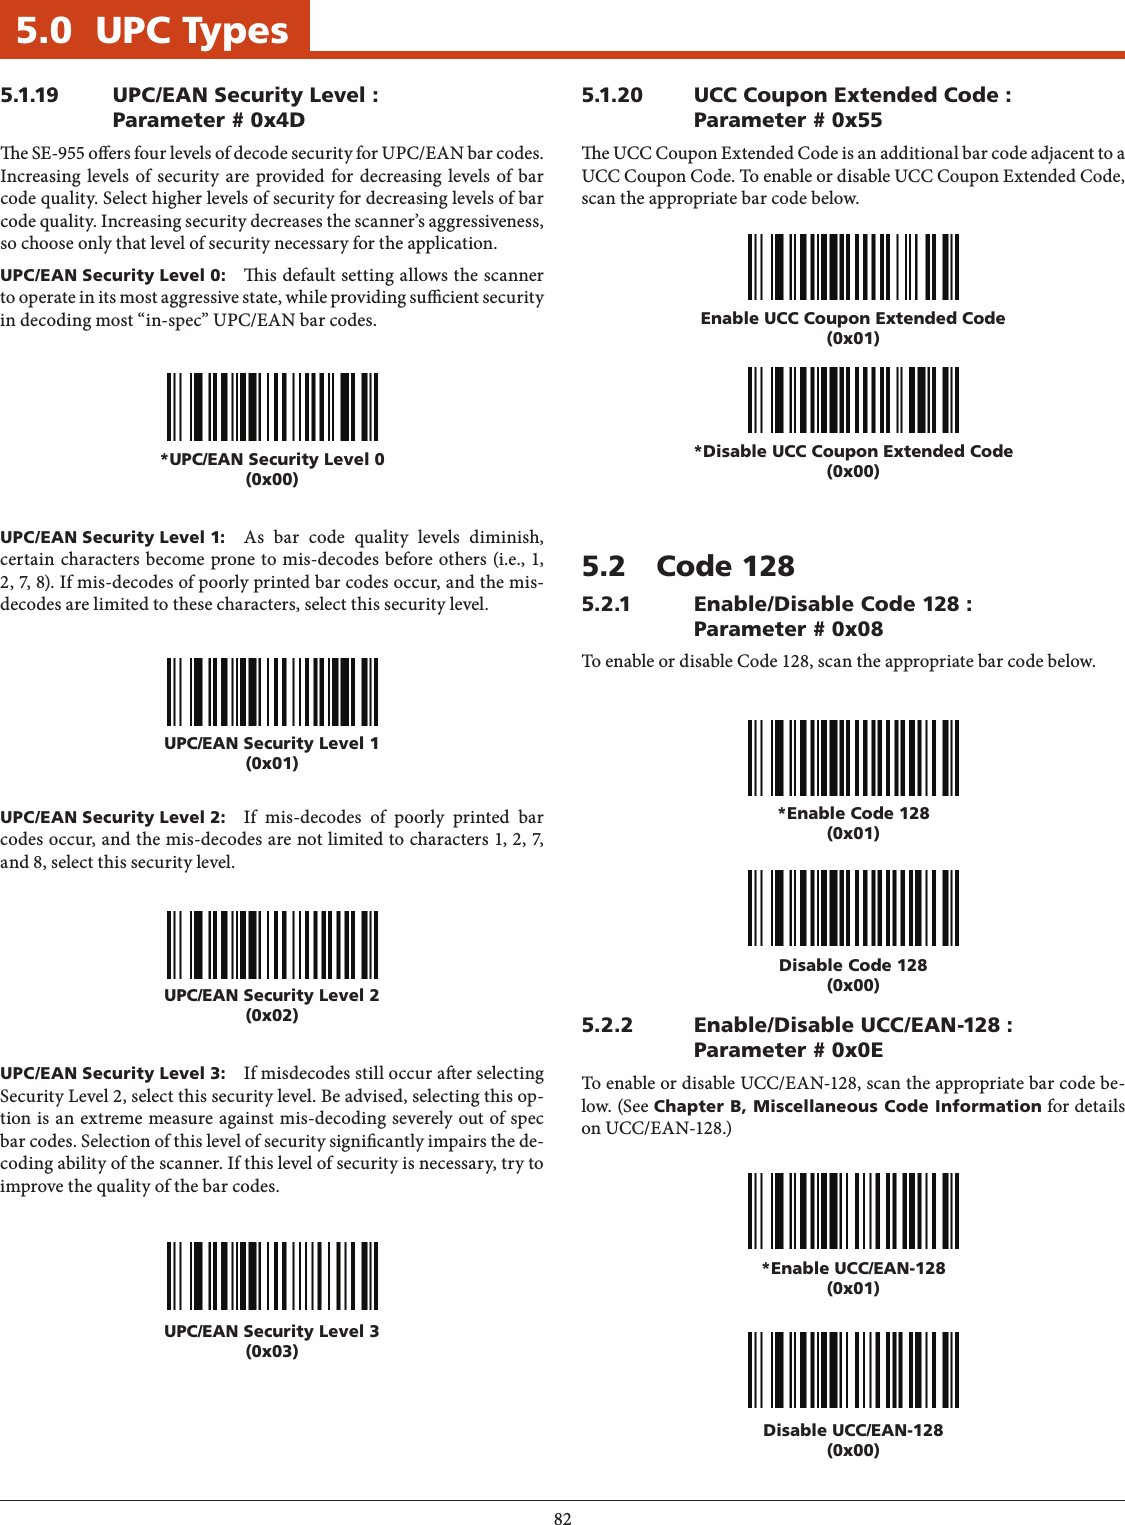 825.0  UPC Types5.1.19  UPC/EAN Security Level : Parameter # 0x4De SE-955 oers four levels of decode security for UPC/EAN bar codes. Increasing levels of security are provided for decreasing levels of bar code quality. Select higher levels of security for decreasing levels of bar code quality. Increasing security decreases the scanner’s aggressiveness, so choose only that level of security necessary for the application.UPC/EAN Security Level 0:  is default setting allows the scanner to operate in its most aggressive state, while providing sucient security in decoding most “in-spec” UPC/EAN bar codes.*UPC/EAN Security Level 0(0x00)UPC/EAN Security Level 1(0x01)UPC/EAN Security Level 2(0x02)UPC/EAN Security Level 3(0x03)UPC/EAN Security Level 1:  As bar code quality levels diminish, certain characters become prone to mis-decodes before others (i.e., 1, 2, 7, 8). If mis-decodes of poorly printed bar codes occur, and the mis-decodes are limited to these characters, select this security level.UPC/EAN Security Level 2:  If mis-decodes of poorly printed bar codes occur, and the mis-decodes are not limited to characters 1, 2, 7, and 8, select this security level.UPC/EAN Security Level 3:  If misdecodes still occur aer selecting Security Level 2, select this security level. Be advised, selecting this op-tion is an extreme measure against mis-decoding severely out of spec bar codes. Selection of this level of security signicantly impairs the de-coding ability of the scanner. If this level of security is necessary, try to improve the quality of the bar codes.5.1.20  UCC Coupon Extended Code : Parameter # 0x55e UCC Coupon Extended Code is an additional bar code adjacent to a UCC Coupon Code. To enable or disable UCC Coupon Extended Code, scan the appropriate bar code below.Enable UCC Coupon Extended Code(0x01)*Disable UCC Coupon Extended Code(0x00)5.2  Code 1285.2.1  Enable/Disable Code 128 : Parameter # 0x08To enable or disable Code 128, scan the appropriate bar code below.5.2.2  Enable/Disable UCC/EAN-128 : Parameter # 0x0ETo enable or disable UCC/EAN-128, scan the appropriate bar code be-low. (See Chapter B, Miscellaneous Code Information for details on UCC/EAN-128.)*Enable Code 128(0x01)*Enable UCC/EAN-128(0x01)Disable Code 128(0x00)Disable UCC/EAN-128(0x00)